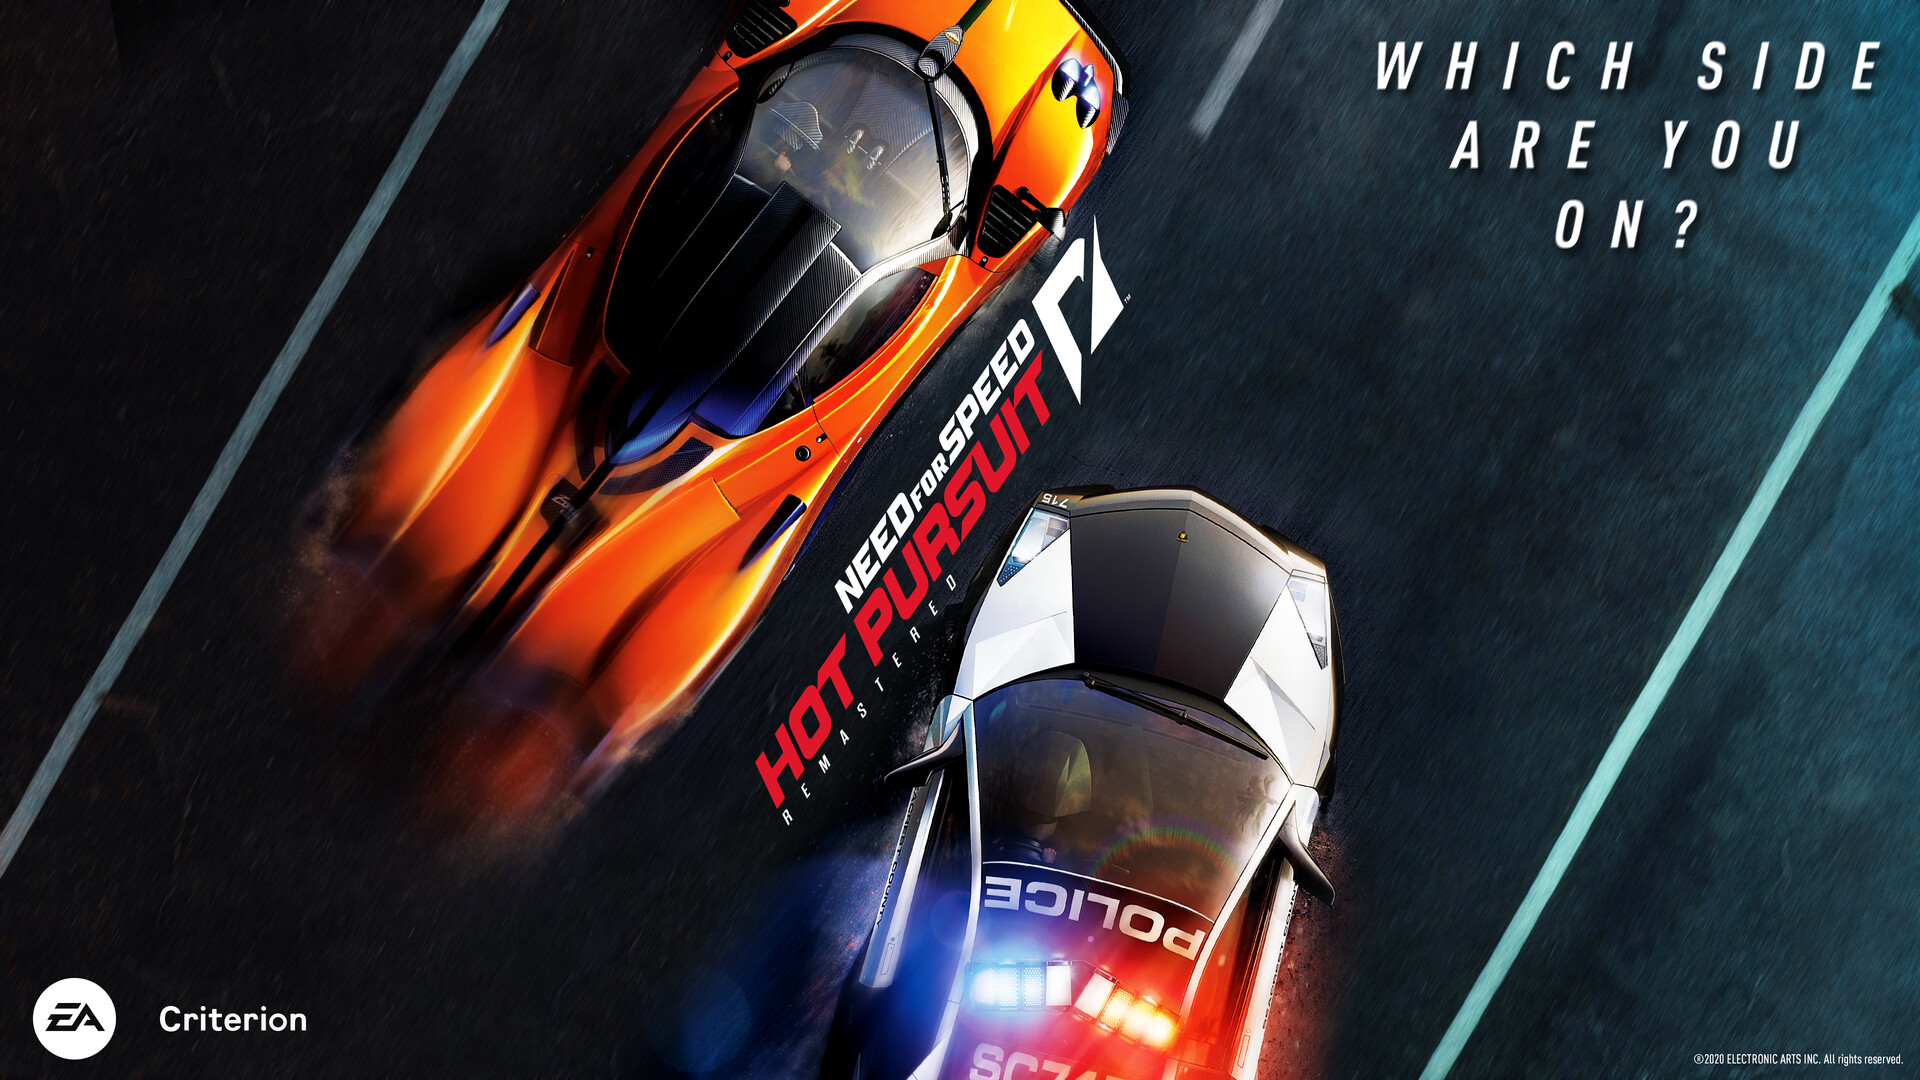 Need for Speed Hot Pursuit Remastered Wallpapers